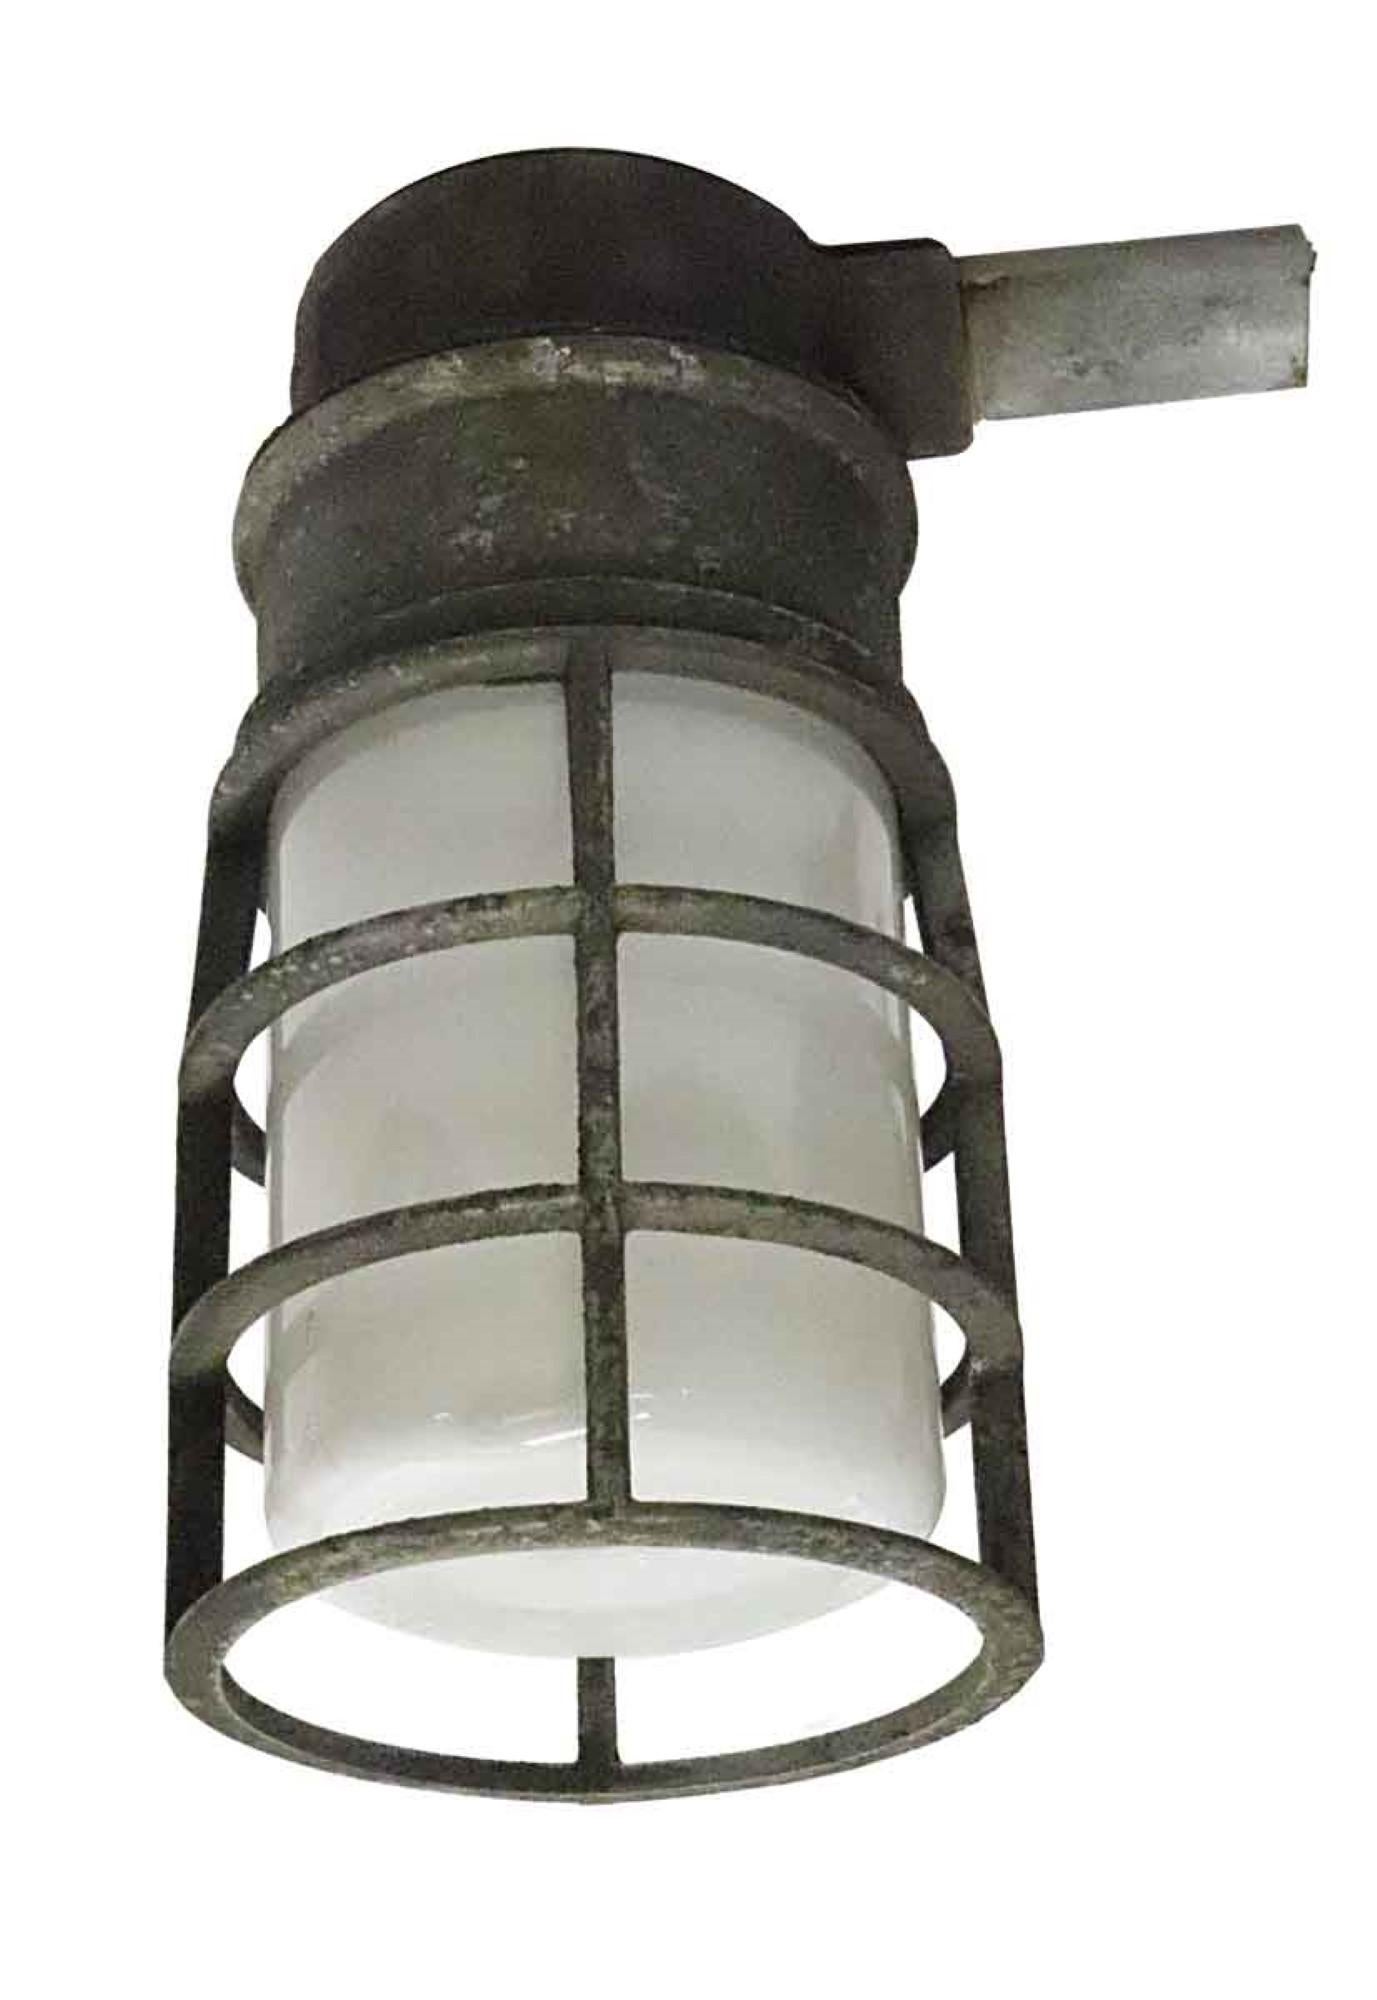 1980s Crouse Hinds industrial lights with white frosted glass shades and steel cages. Sold as a set of four. Will be rewired when purchased. This can be viewed at our Scranton, Pennsylvania location. Please inquire for the exact address.